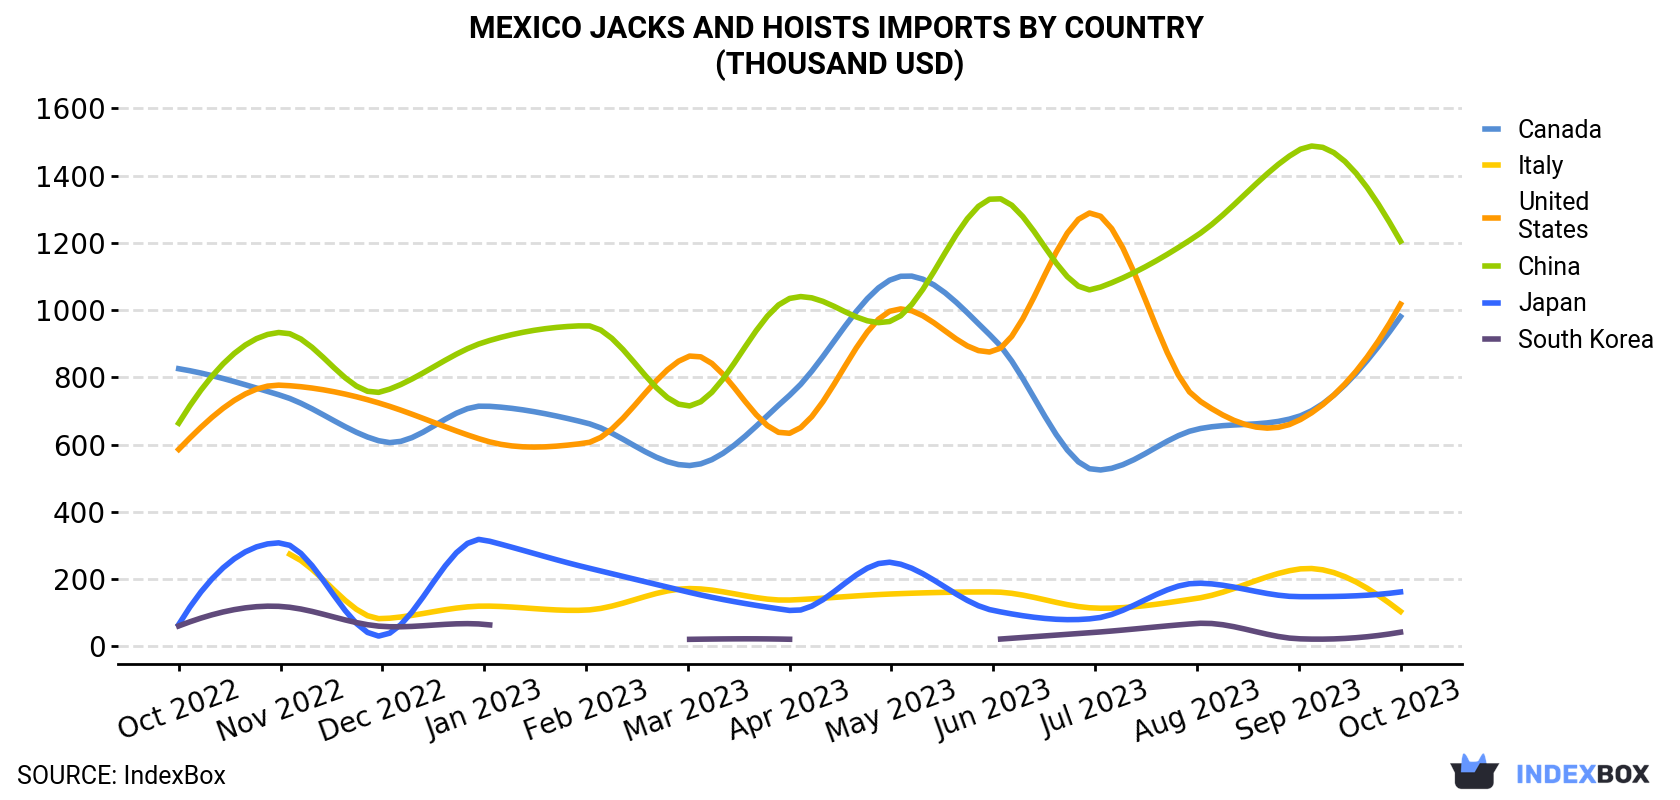 Mexico Jacks And Hoists Imports By Country (Thousand USD)